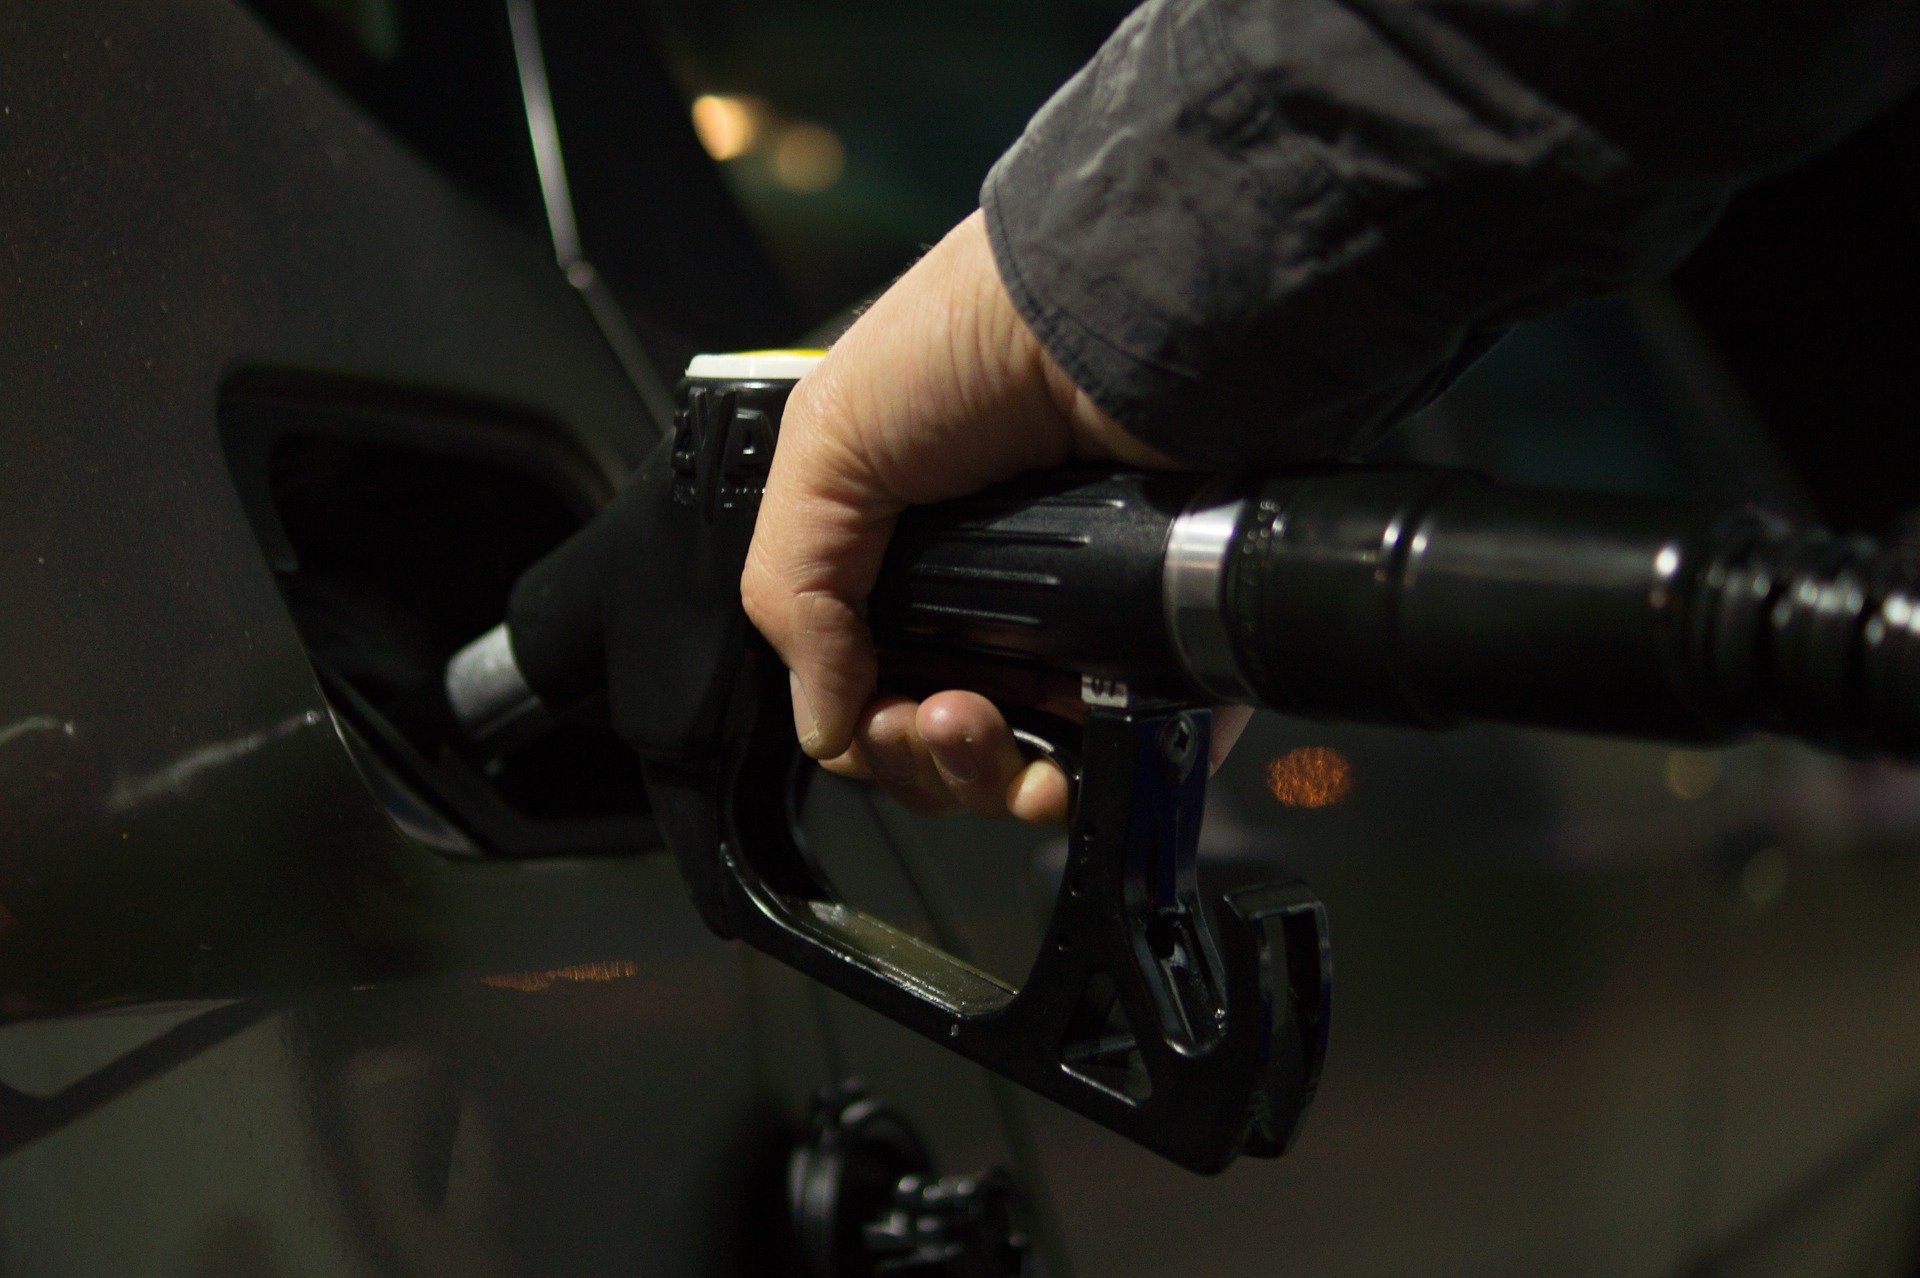 Fuel price today: Petrol and Diesel rates remain unchanged on April 8, 2022